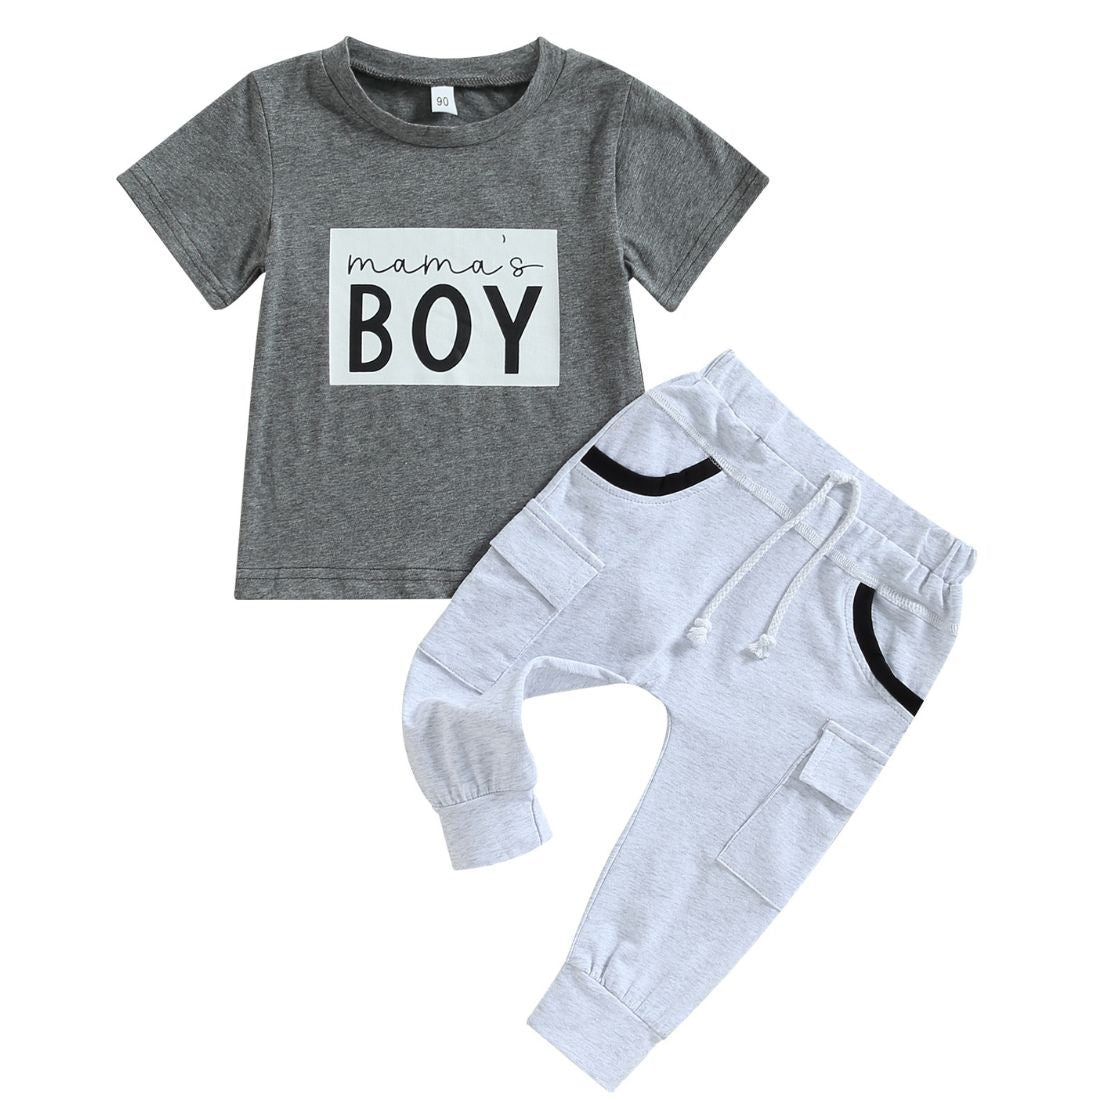 2-Piece Clothing Set - My Trendy Youngsters | Buy on-trend and stylish Baby and Toddler Clothing Sets @ My Trendy Youngsters - Dress your little one in Style @ My Trendy Youngsters